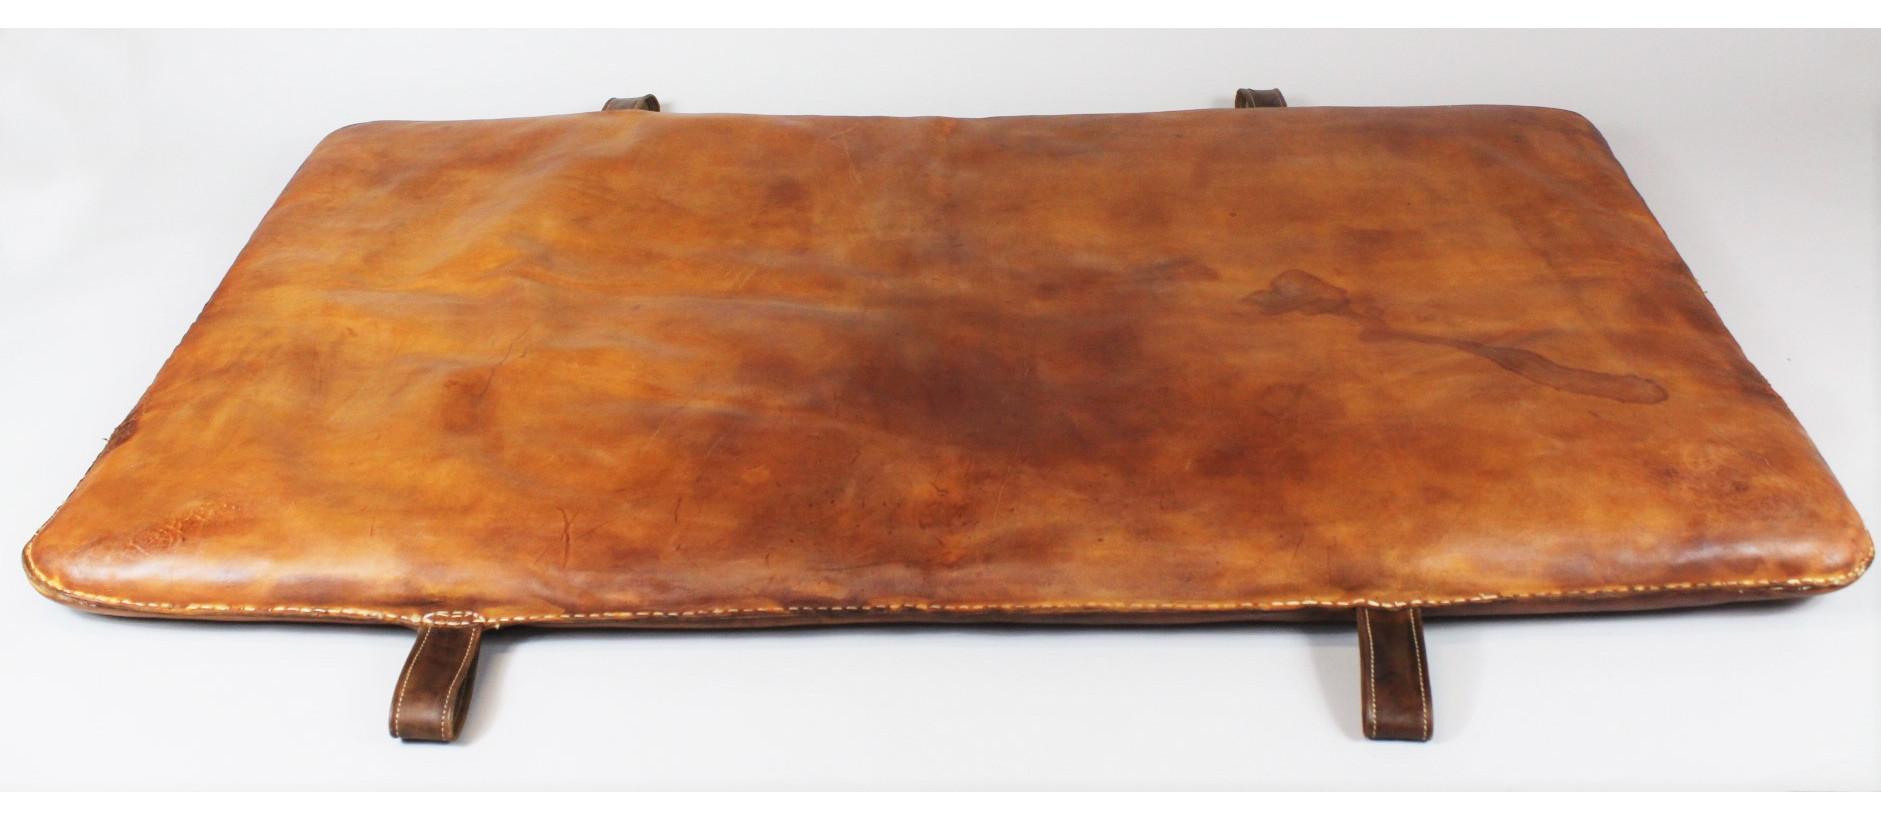 Leather gym mat from the 1930s. The mat is made from thick leather with nice patina.